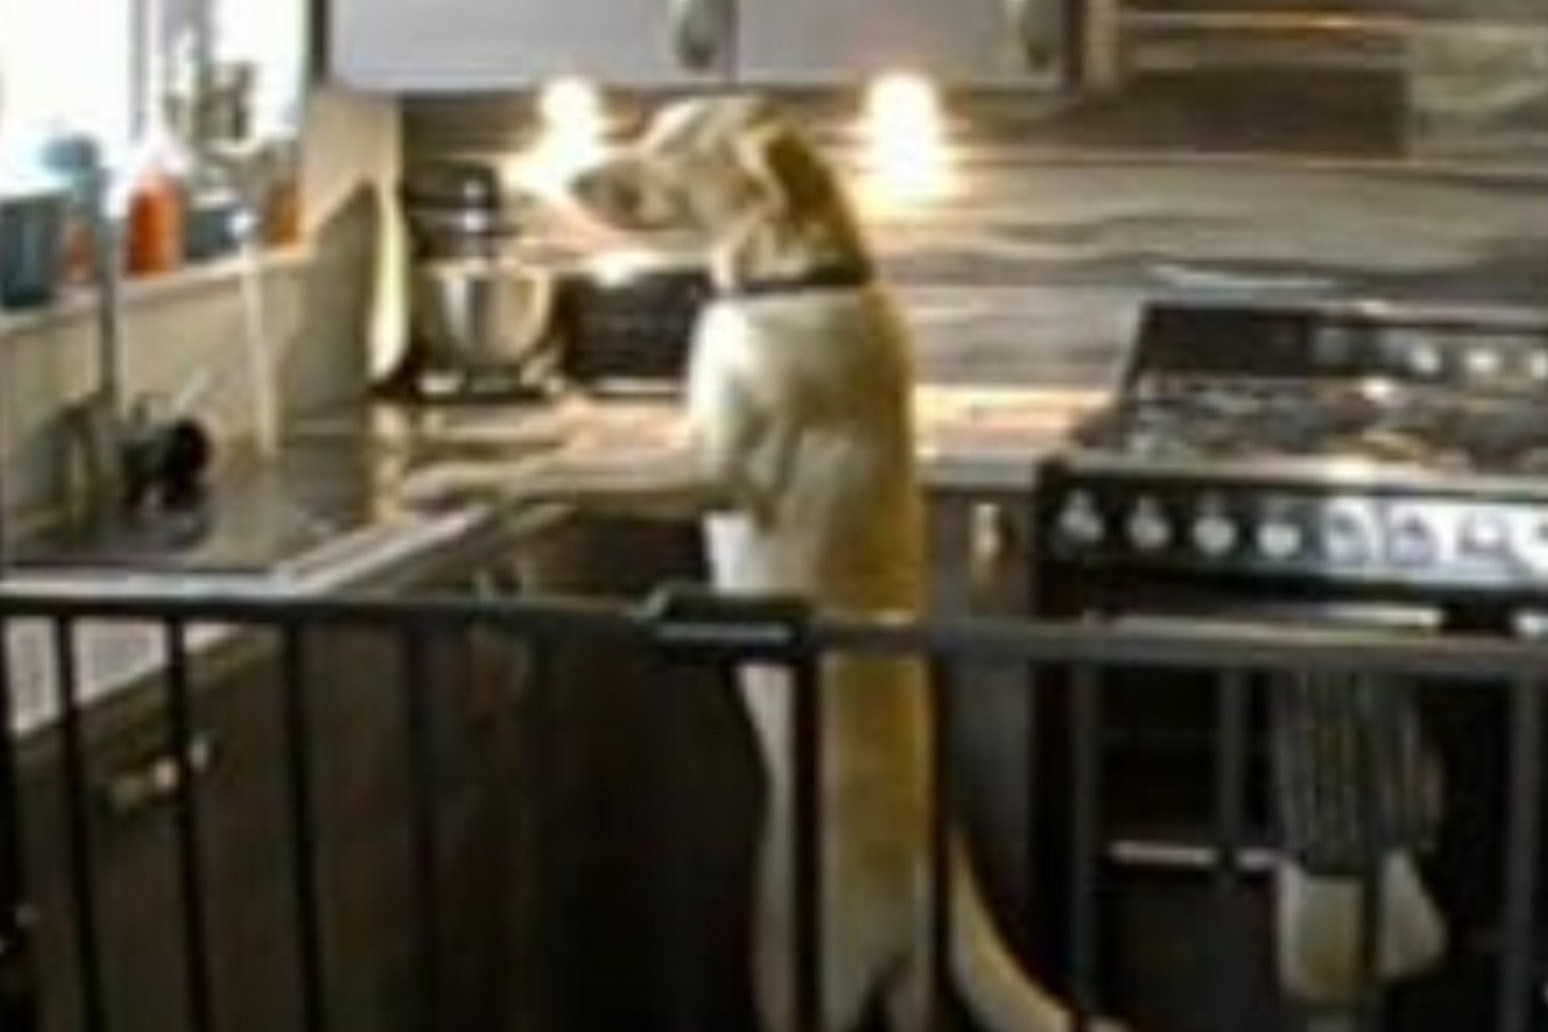 Dog turning on kitchen tap among more unusual canine related insurance claims